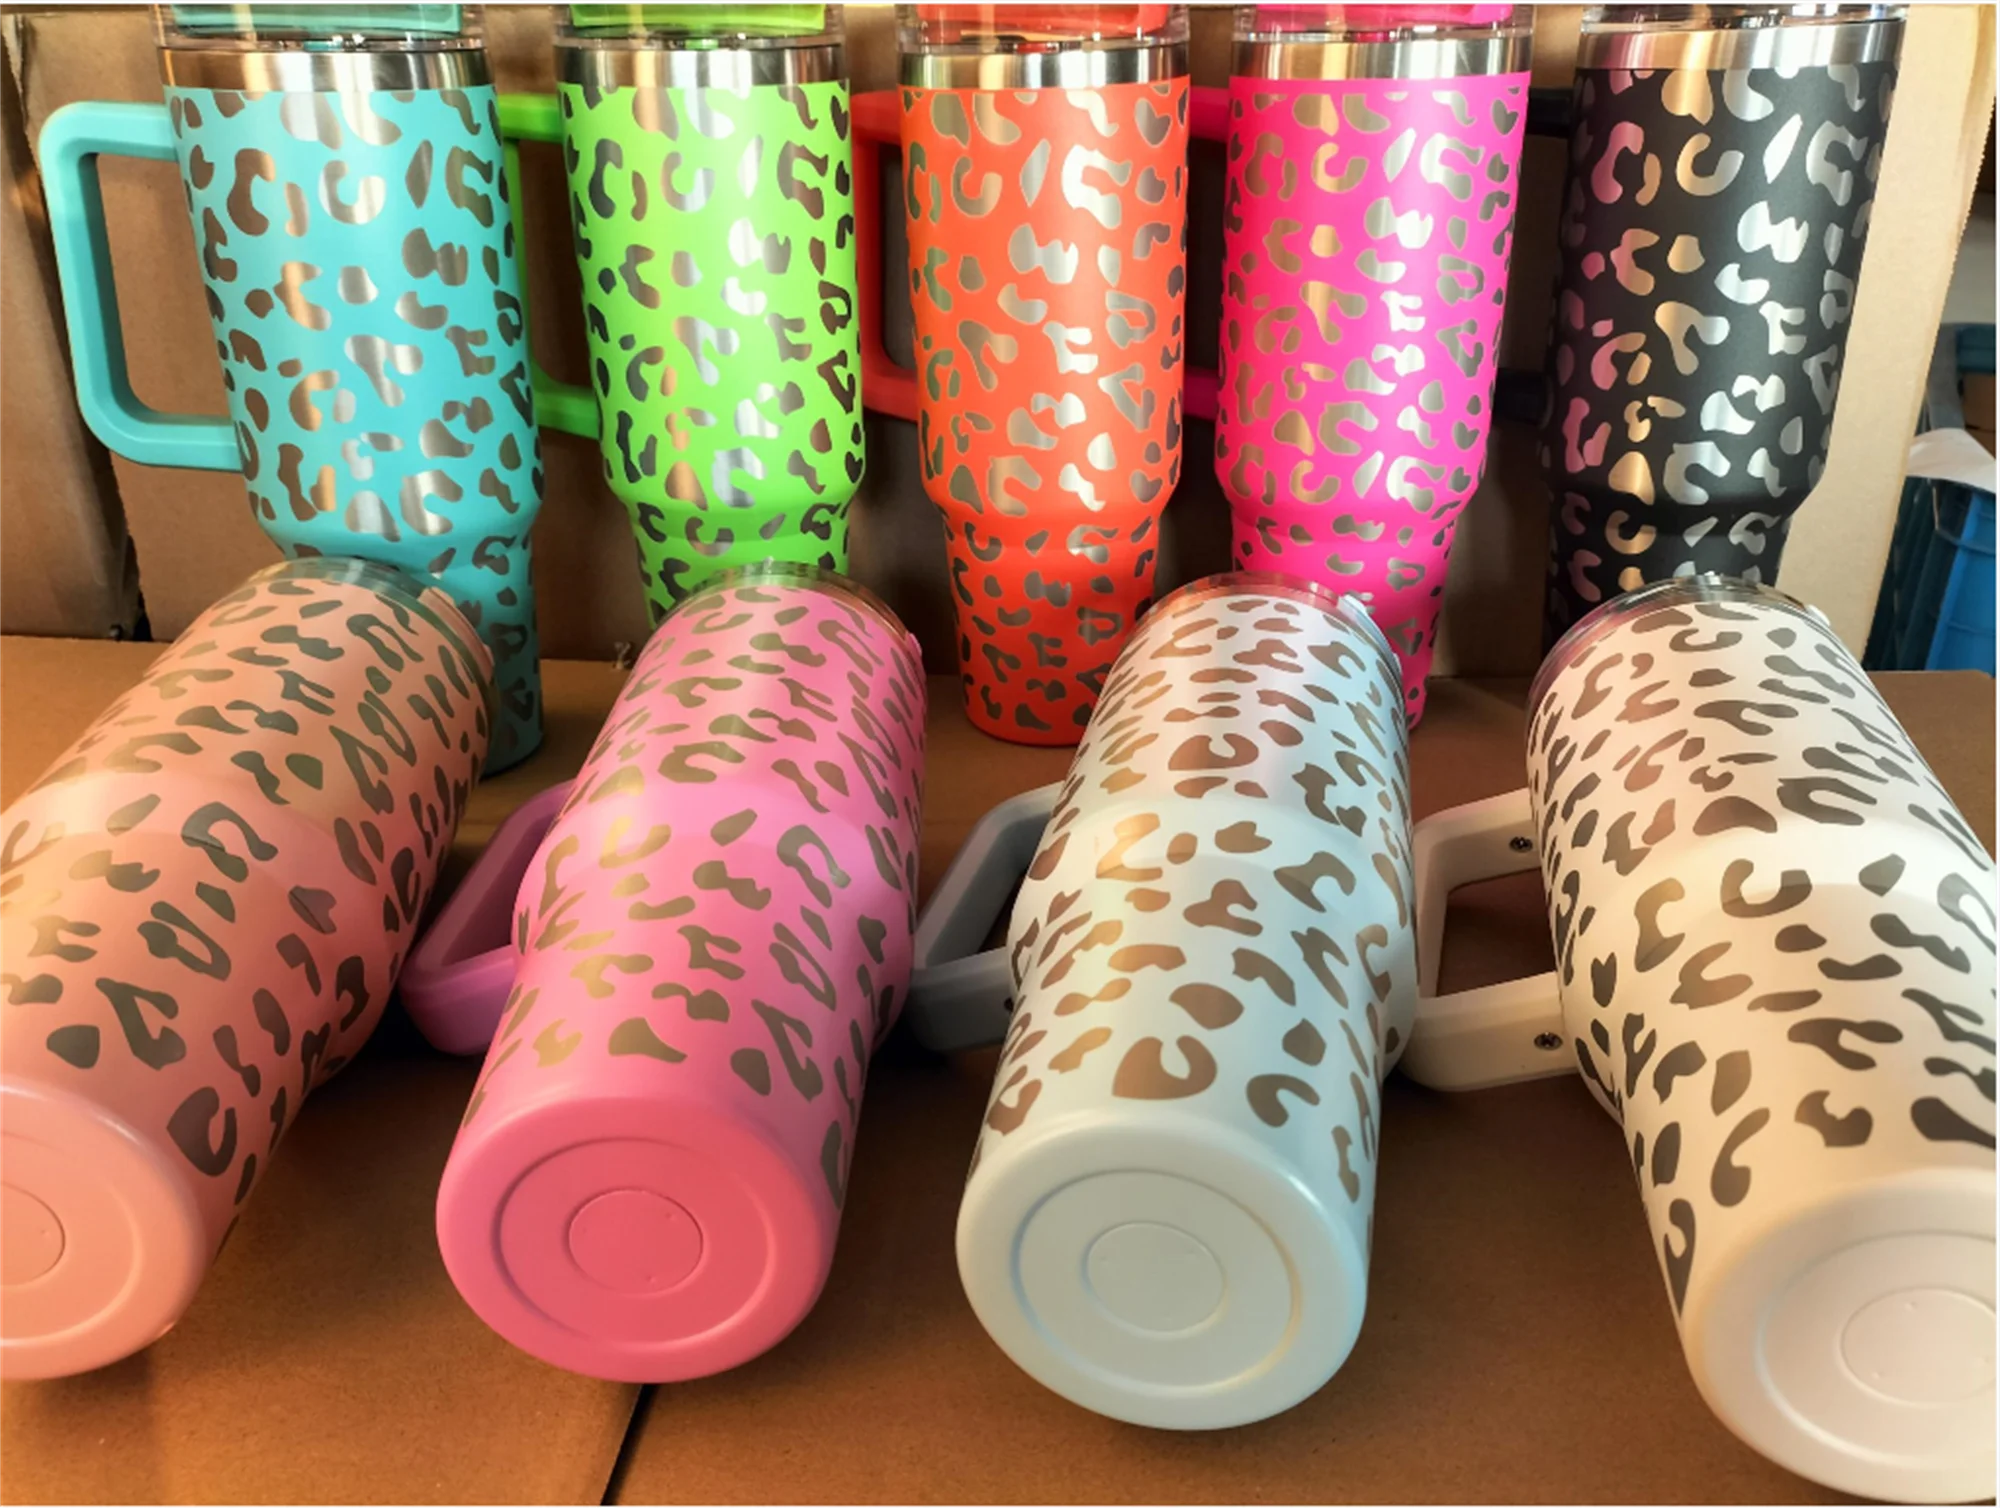 40 Oz Tumbler with Handle Leopard Print Car Mug with Straw Outdoor Sports  Travel Stainless Steel Thermos Customizable Gifts - AliExpress